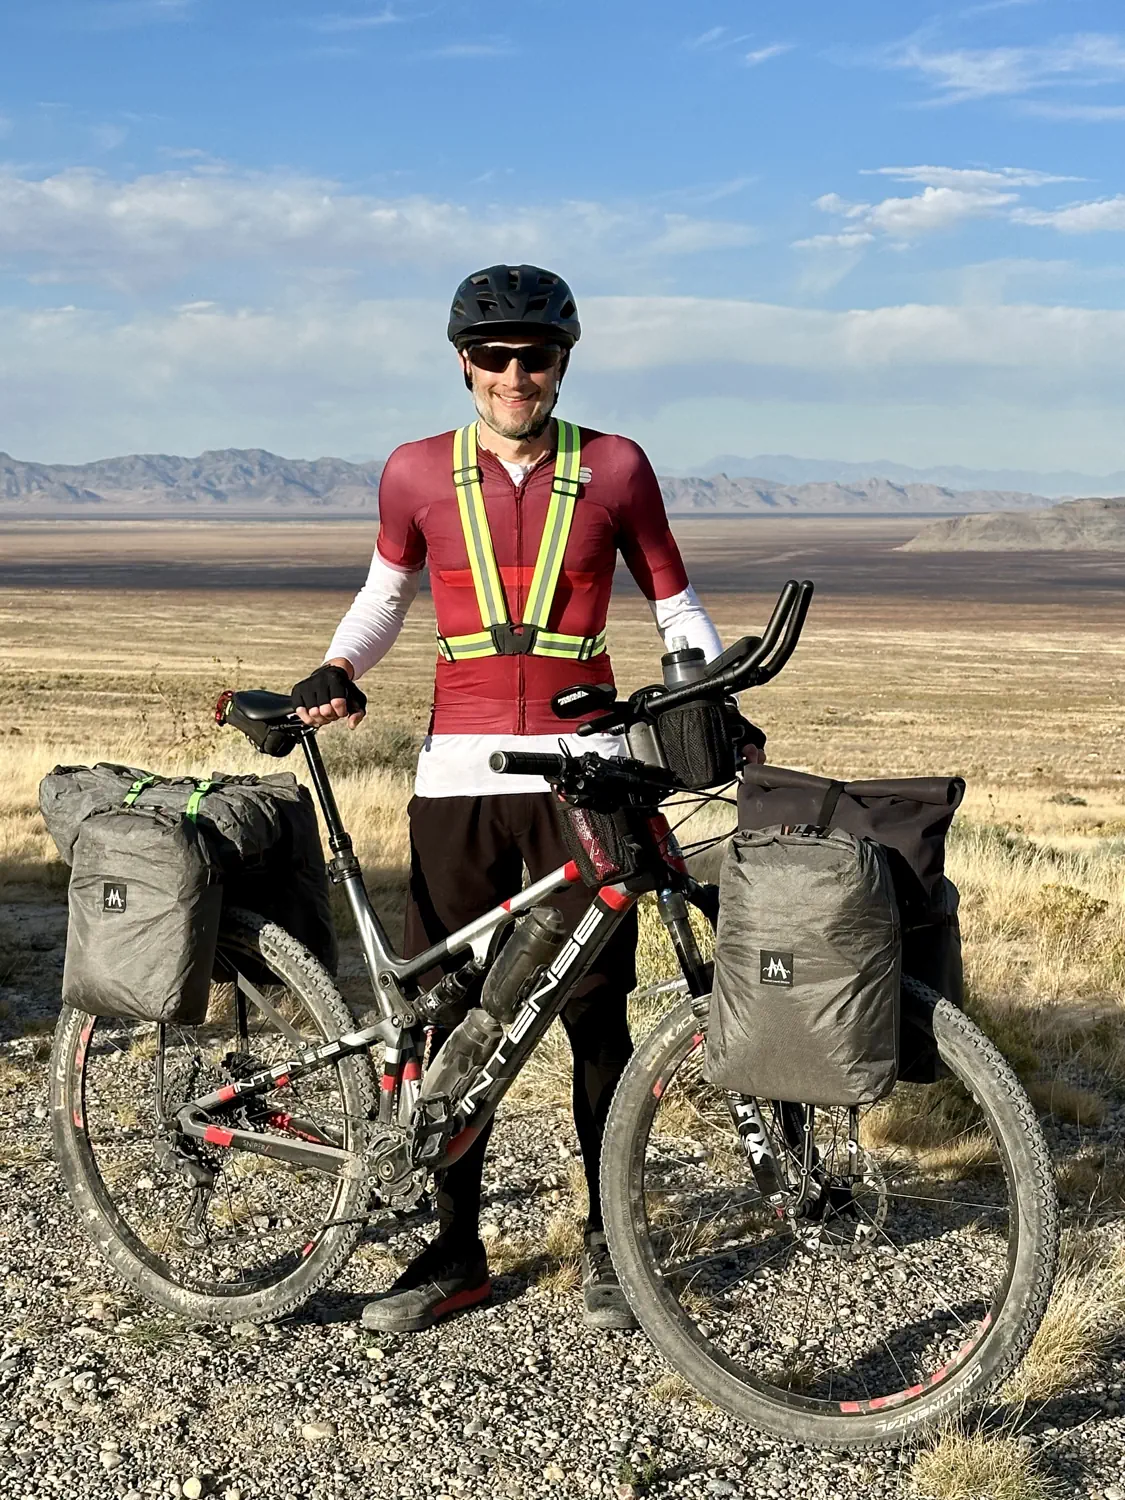 Keith sent this bikepacking photo along with his Letter of Intent